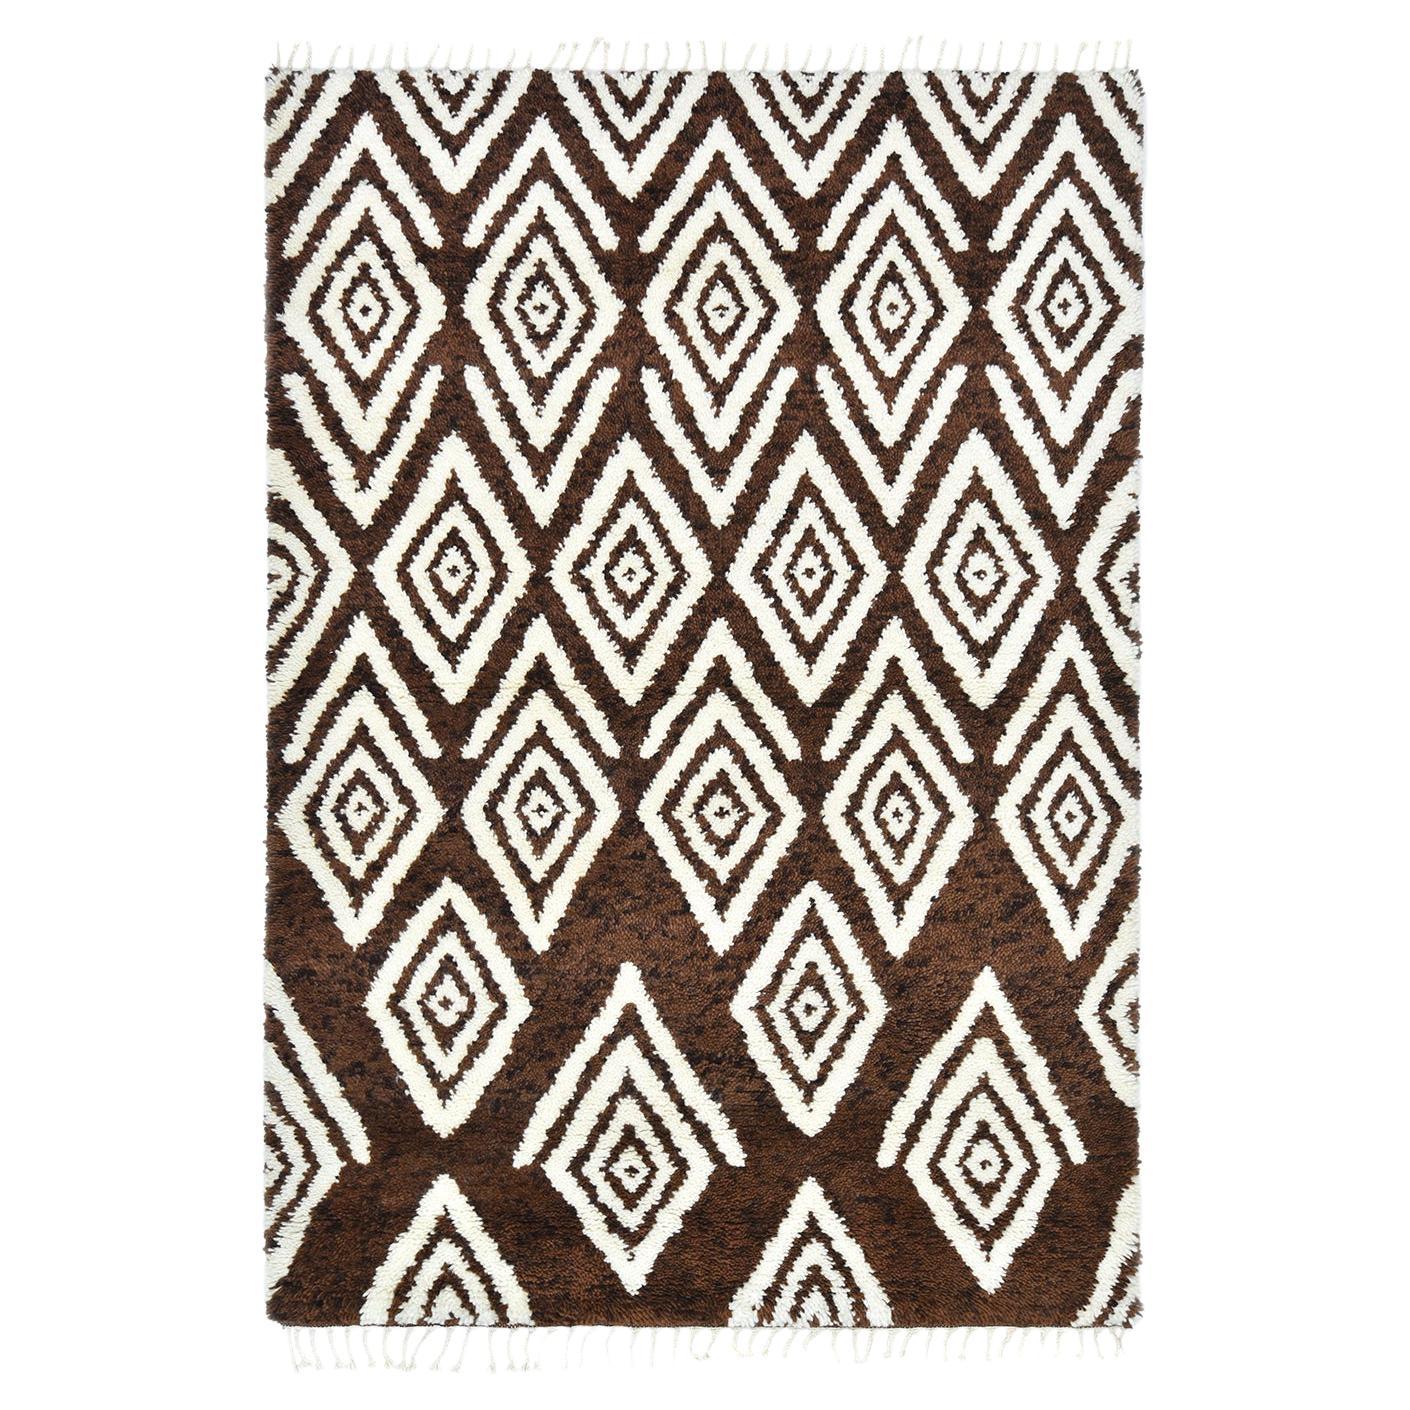 Solo Rugs Moroccan Geometric Hand Knotted Brown Area Rug